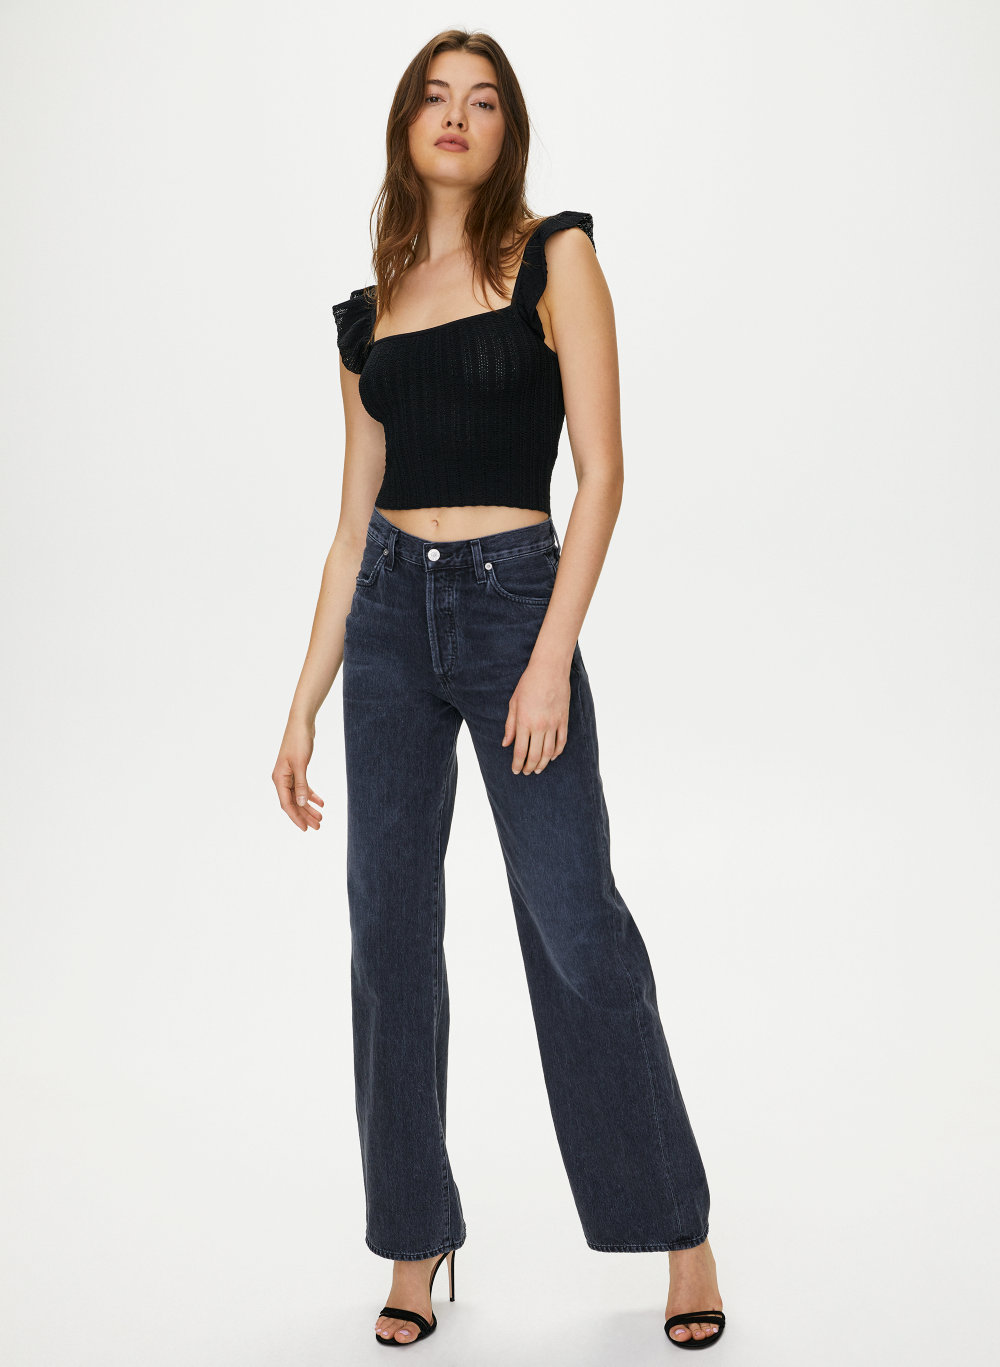 citizens of humanity trouser jeans